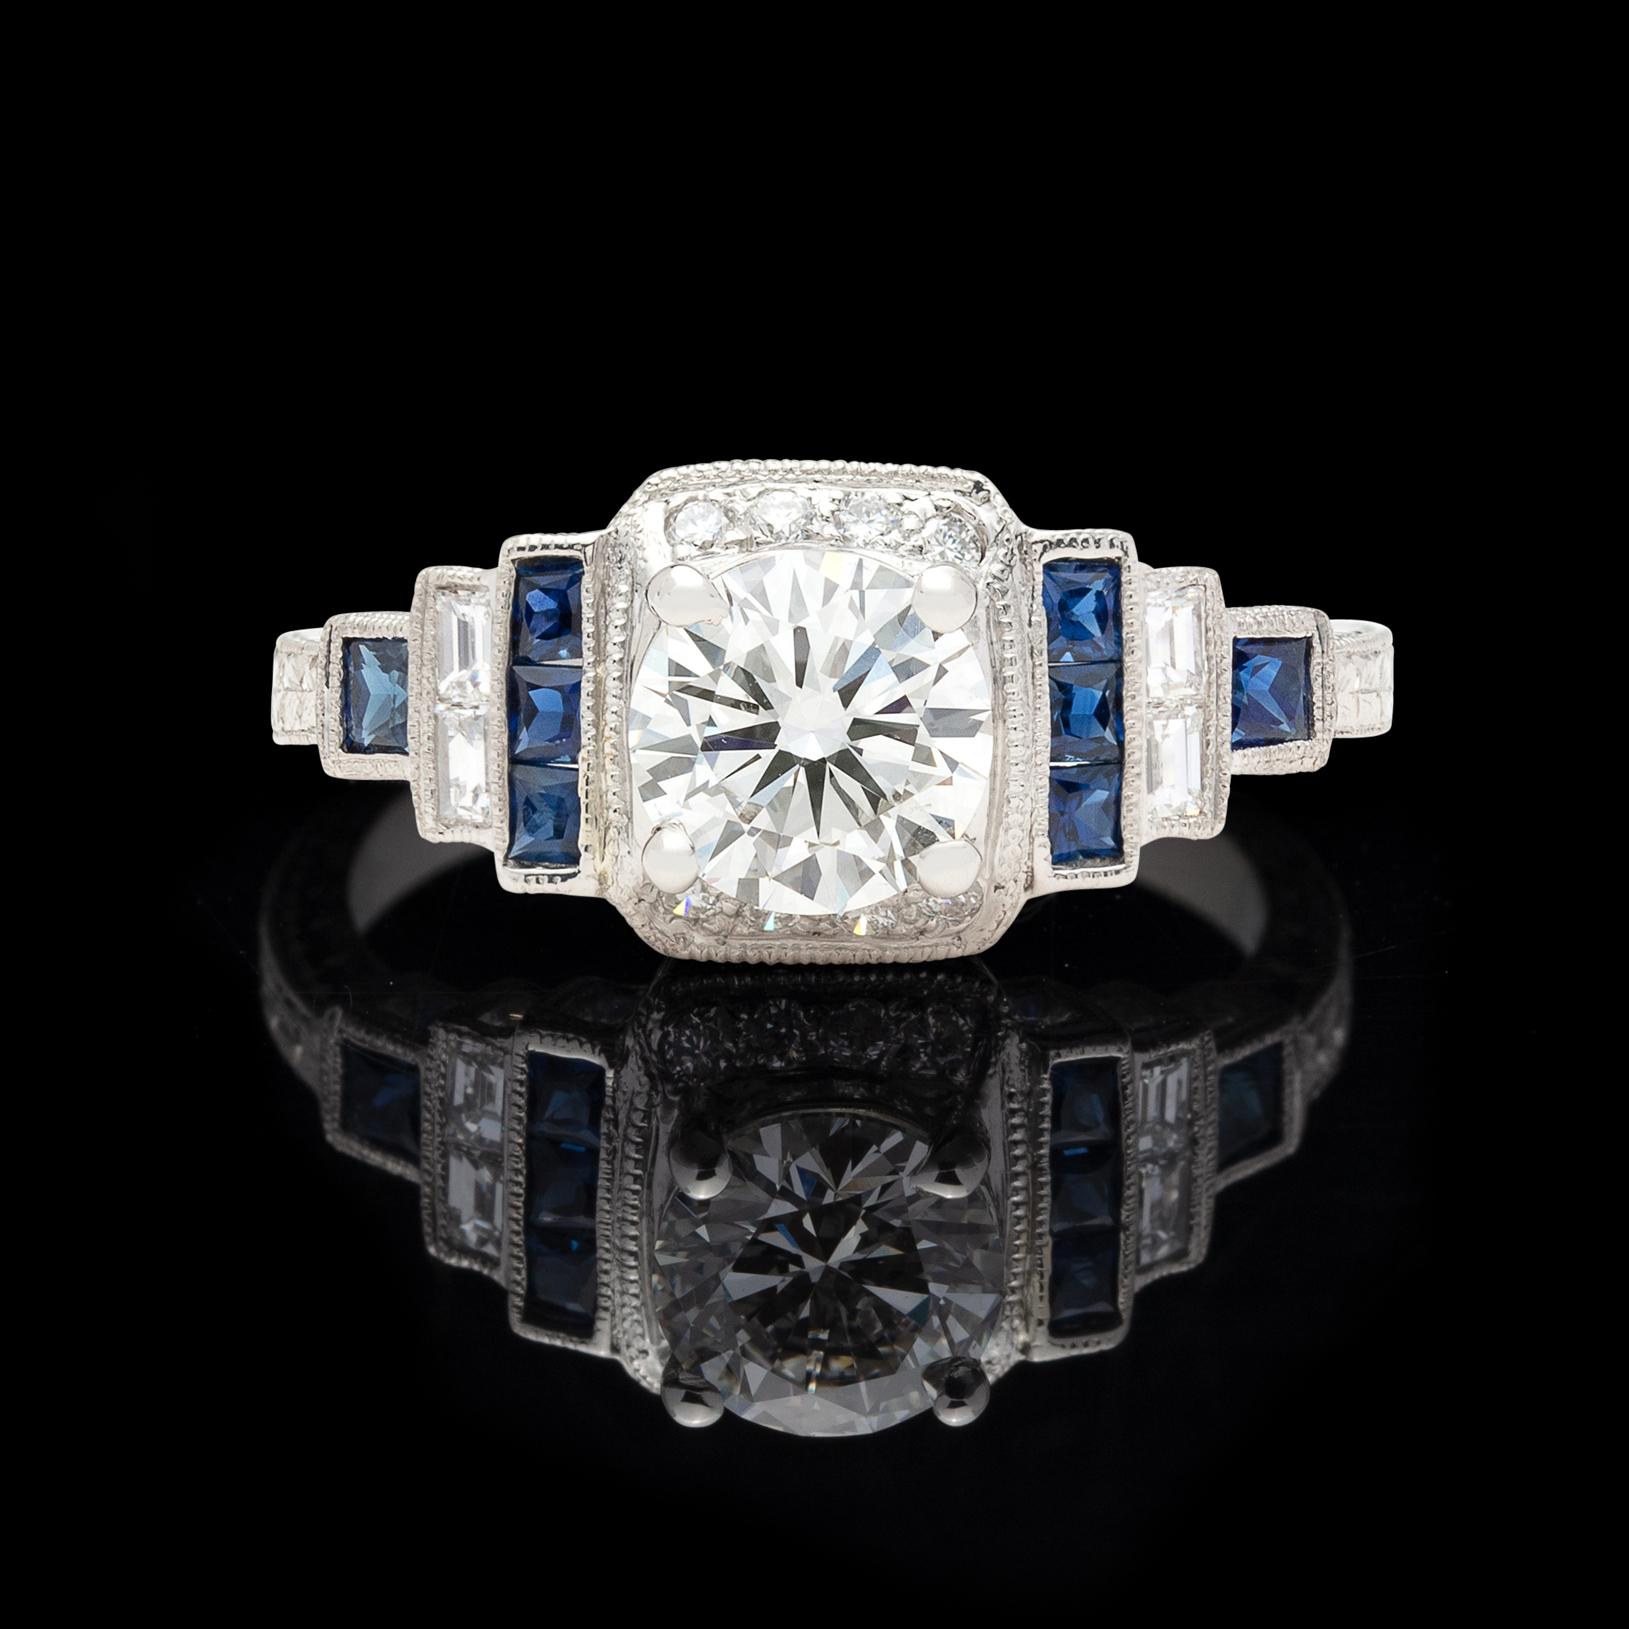 Inspired by Art Deco stylings, the tapering platinum engagement ring features a GIA  J color and SI1 clarity 1.00 carat round brilliant-cut diamond, with stepped shoulders set with 12 round brilliant and baguette-cut diamonds, as well as 8